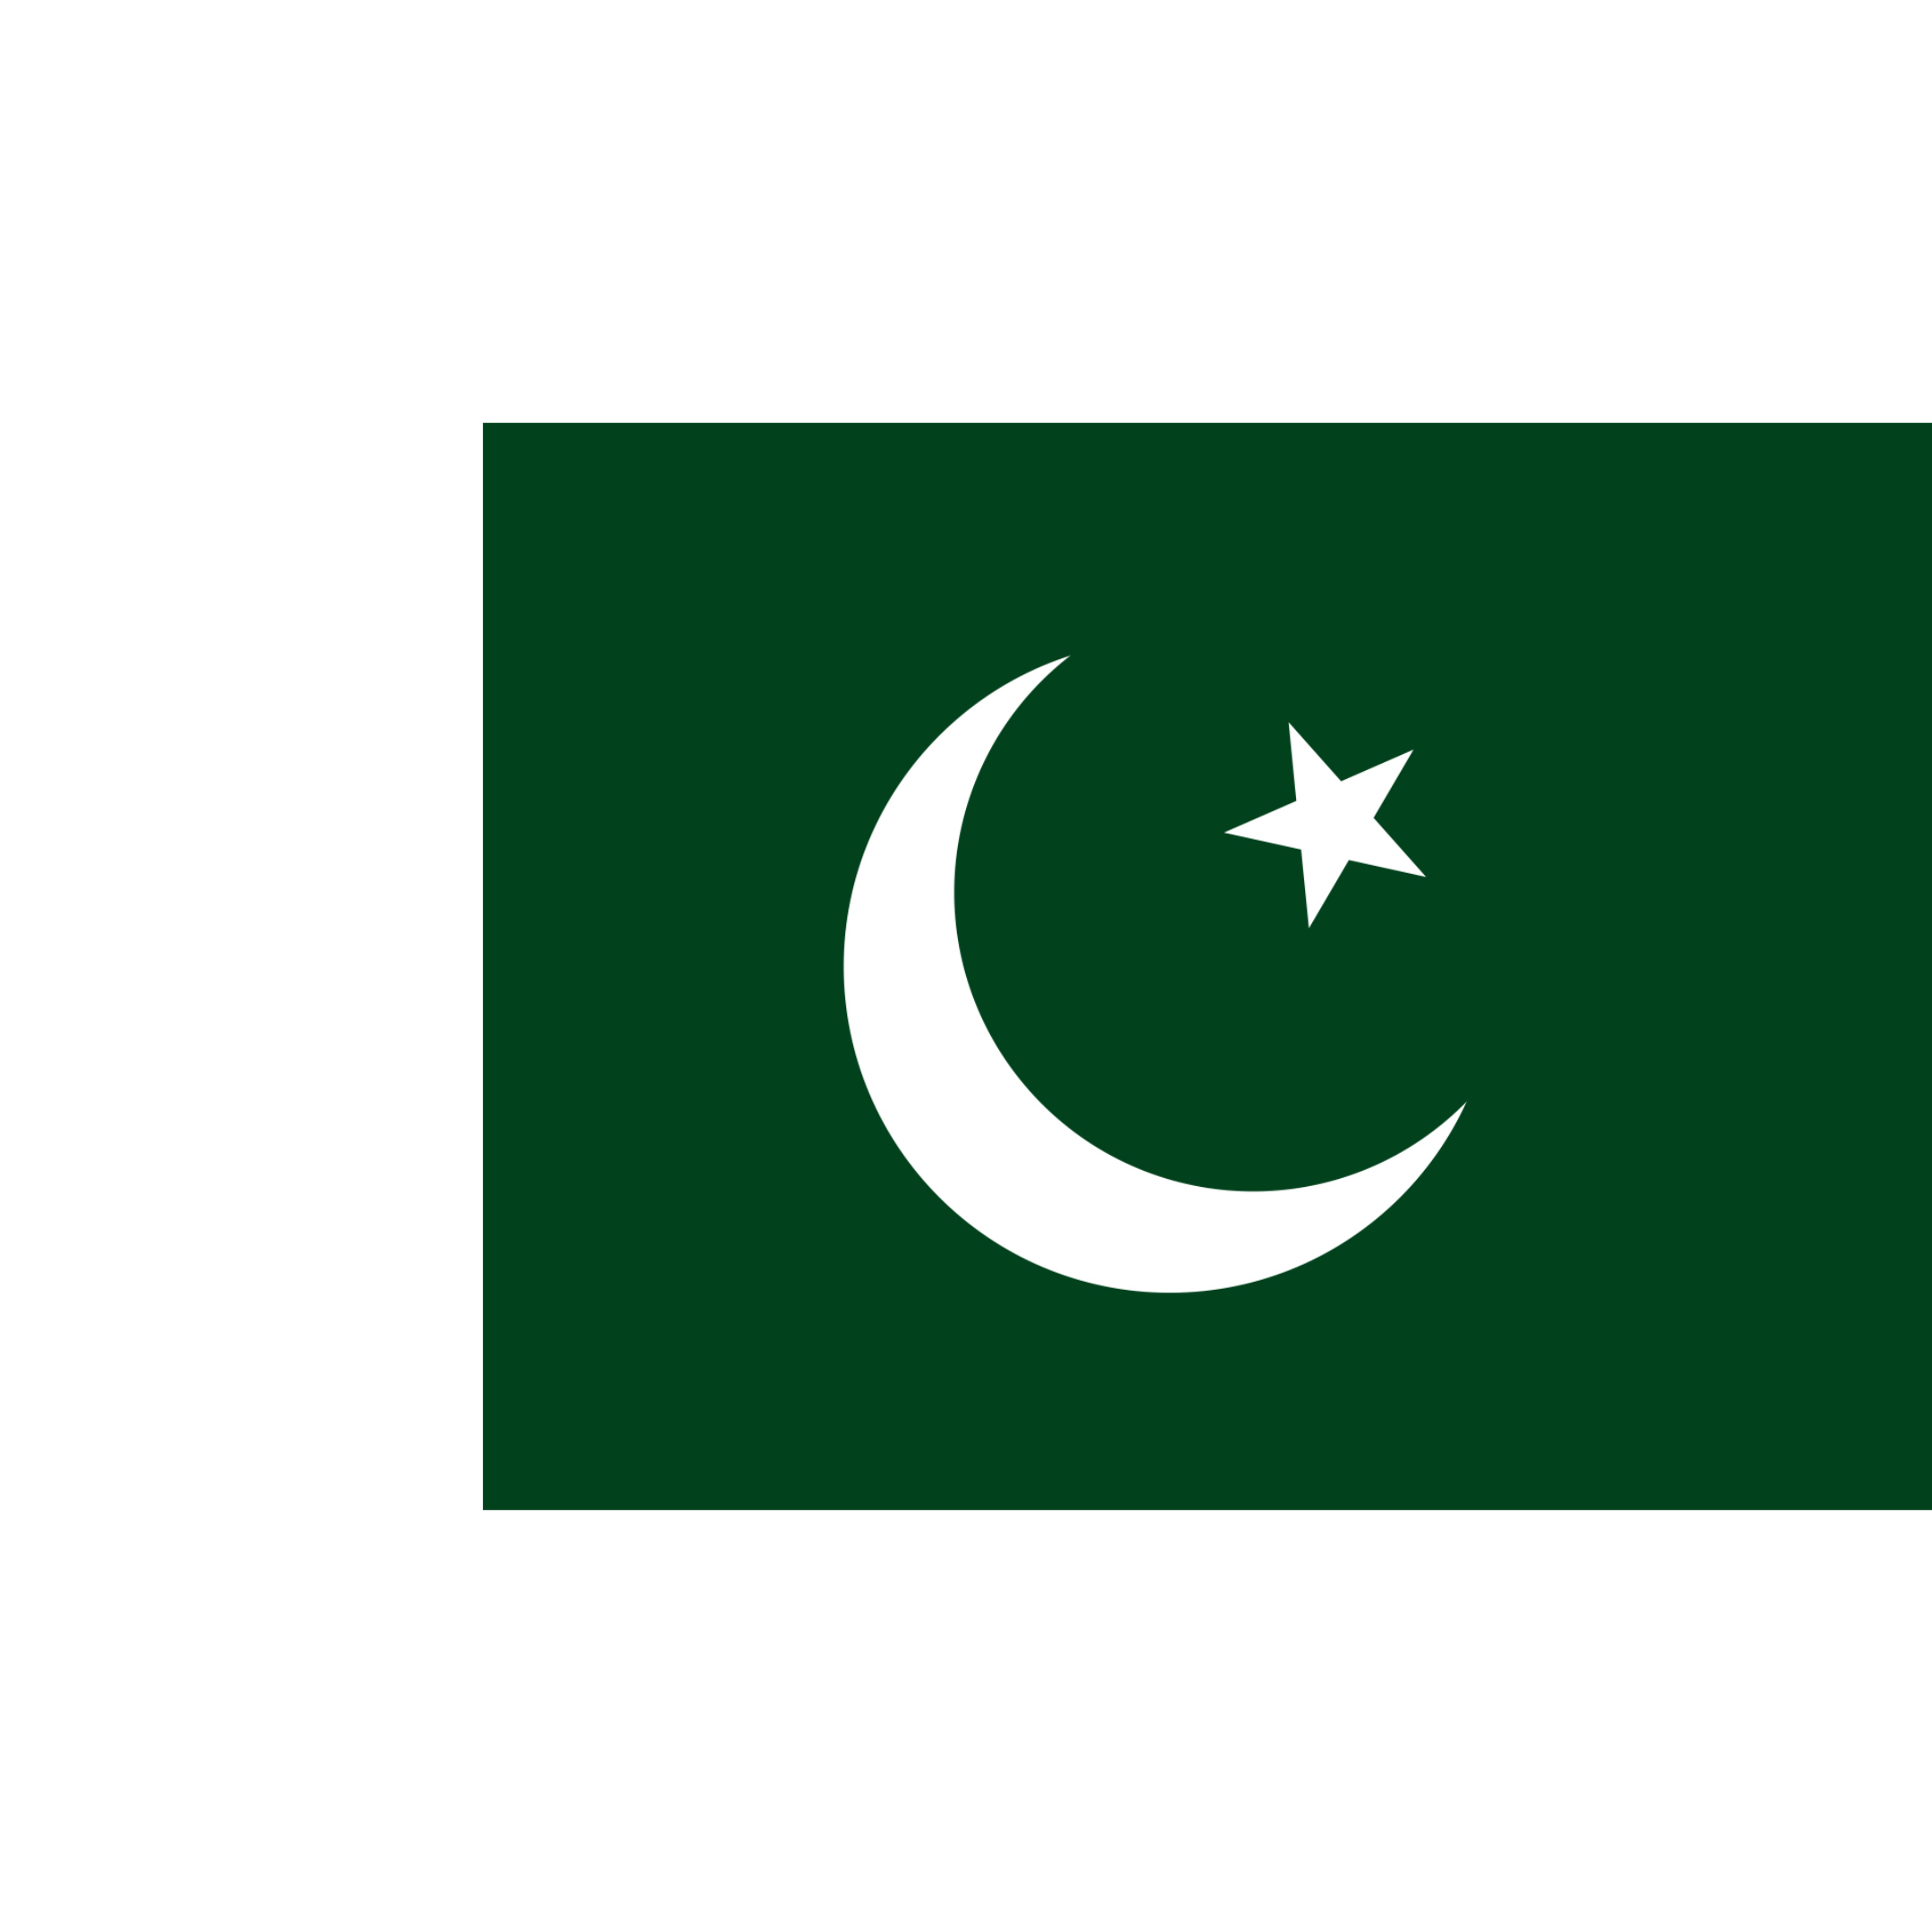 The flag of Pakistan has a white star and crescent moon on a dark green background, with a vertical white stripe on the left.